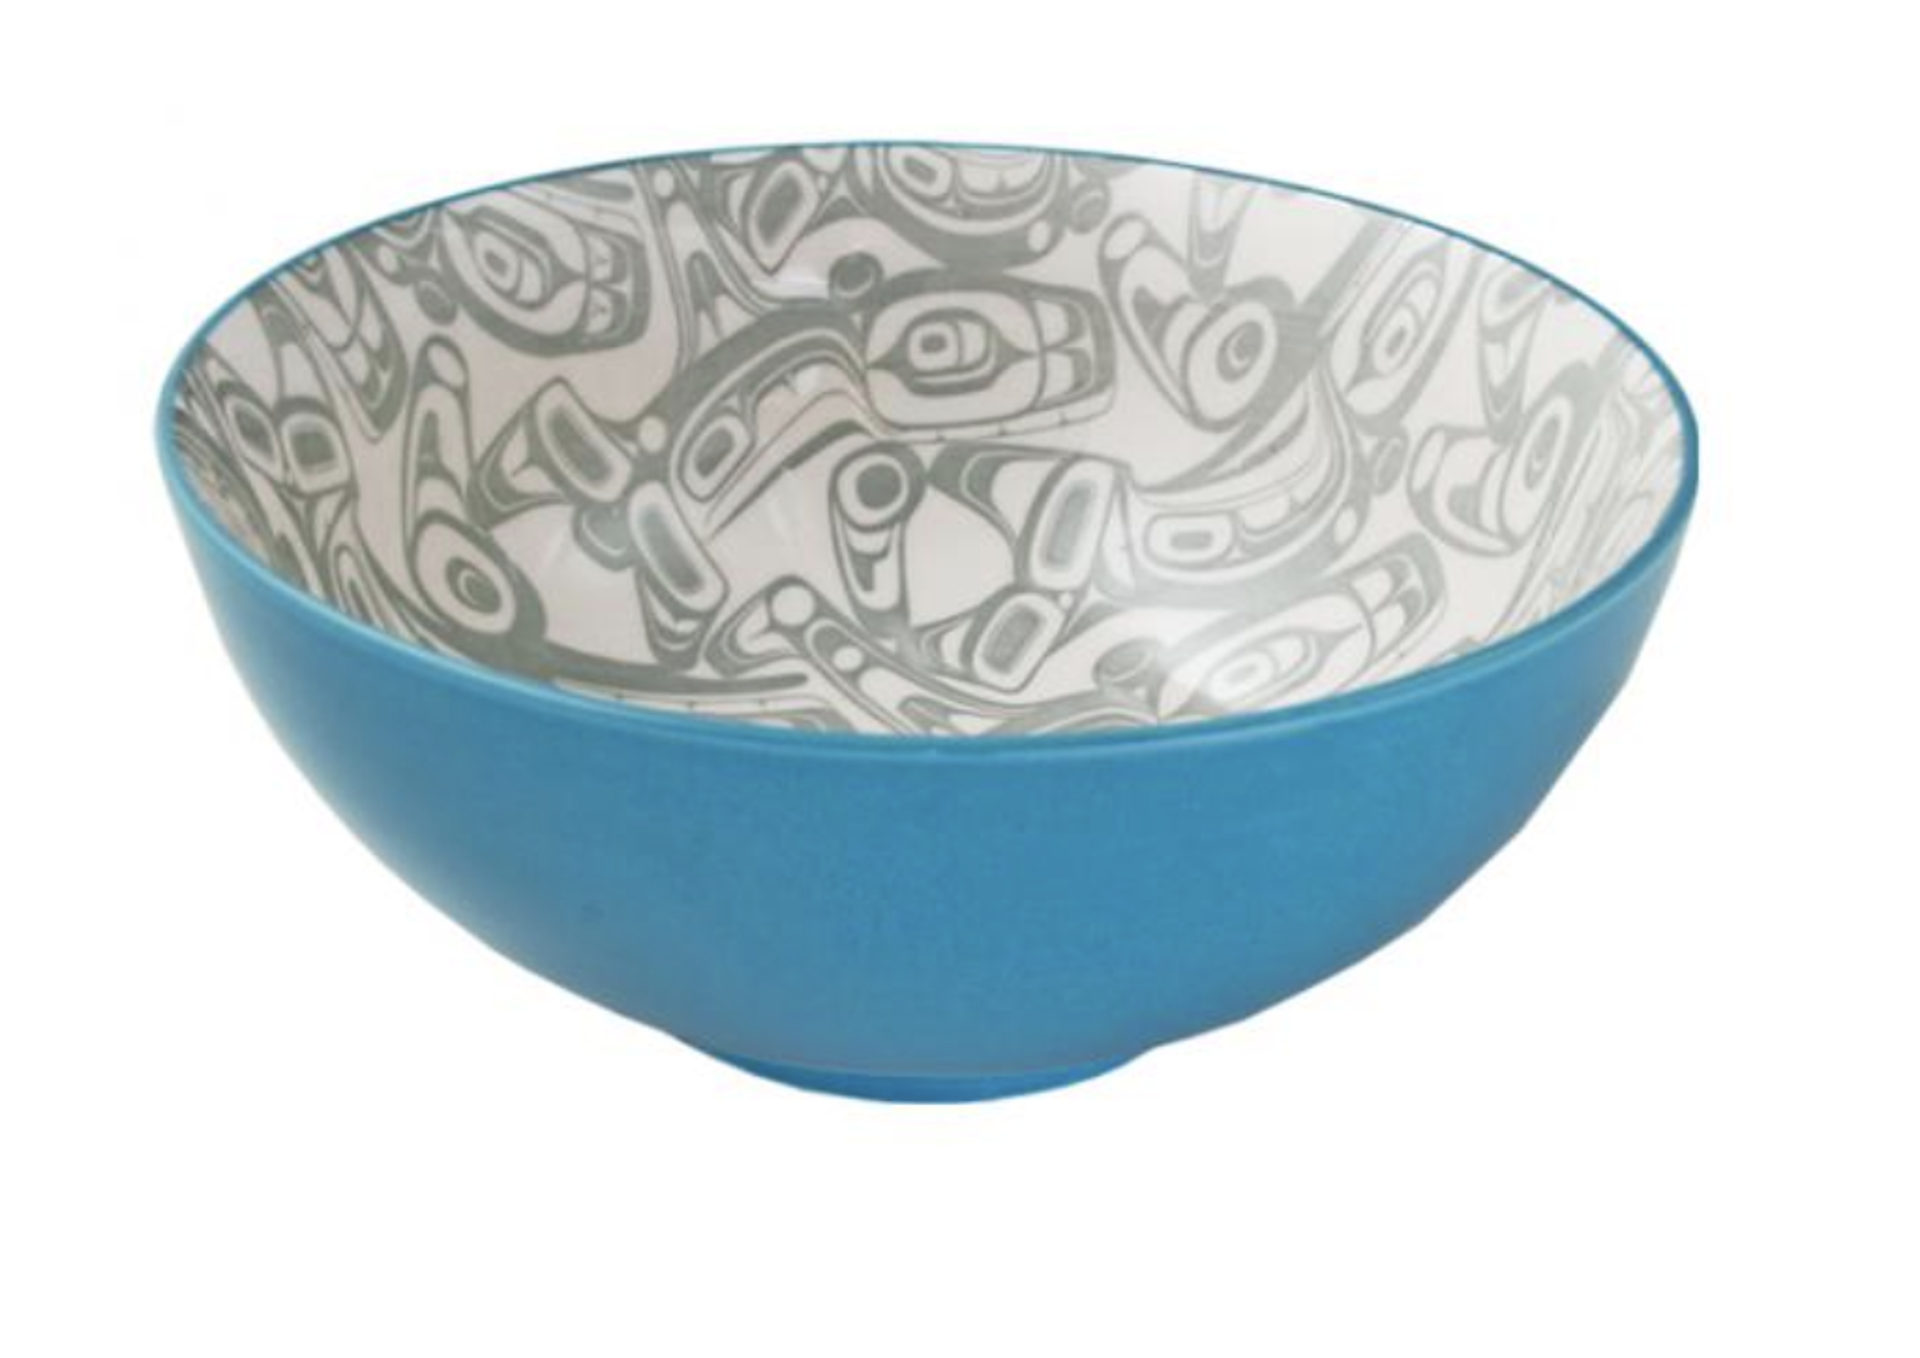 Orca Large Bowl by Kelly Robinson